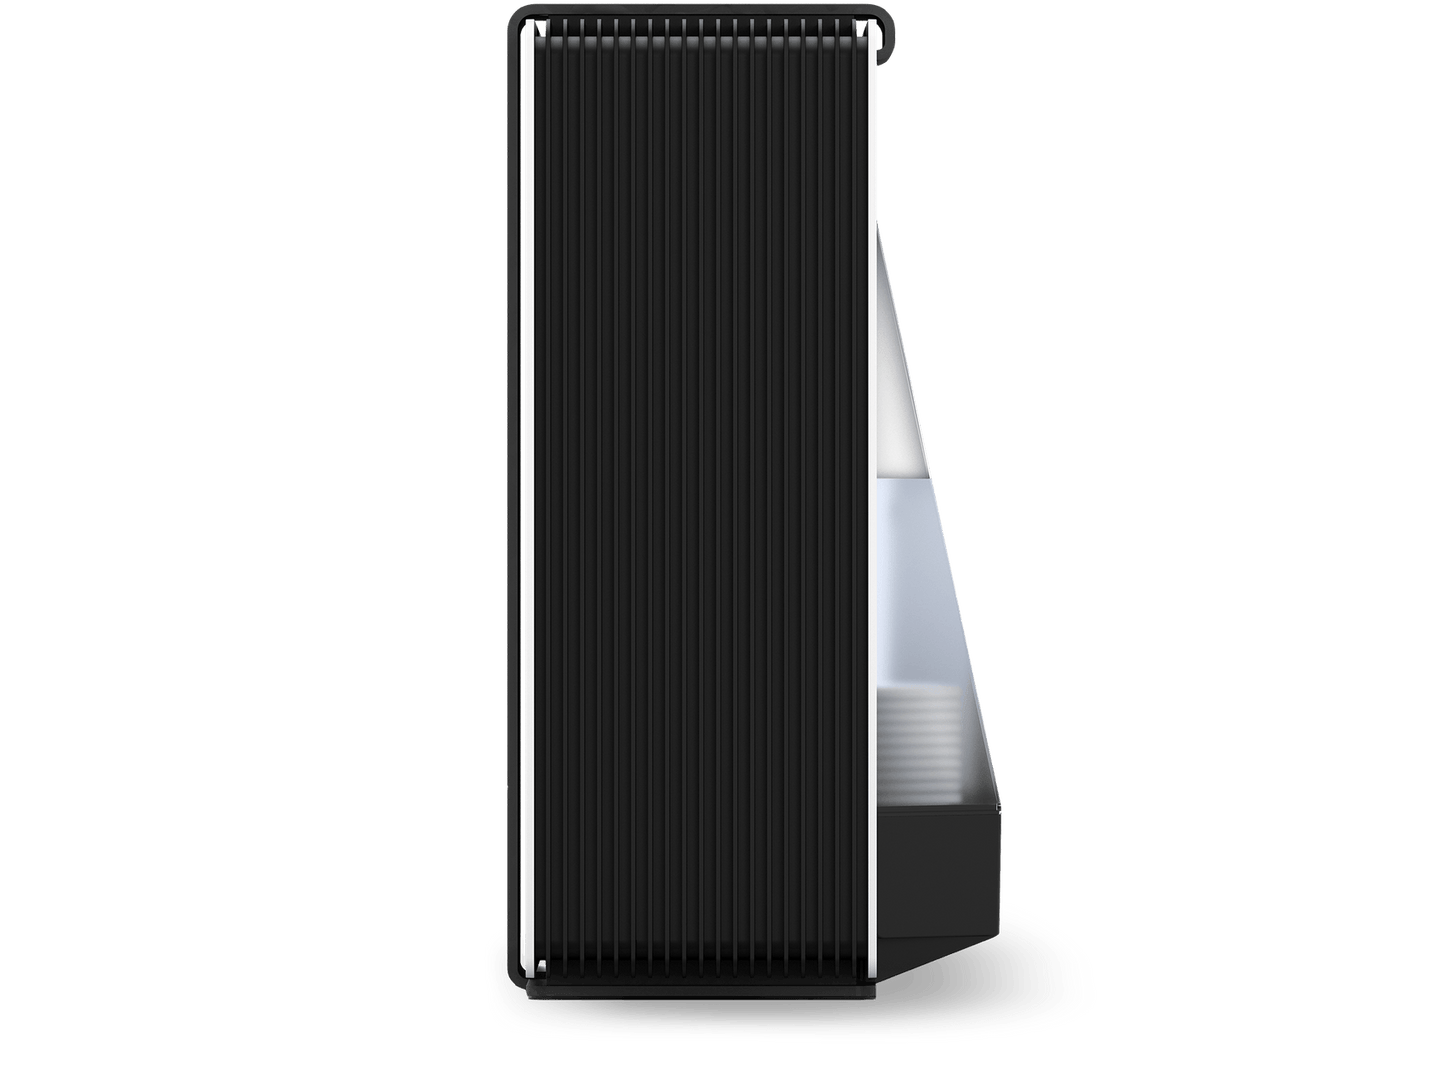 Air Purifiers Robert Air Washer - Stadler Form Powerful Air Improver - 2-in-1 Humidifier and Air Purifier Stadler Form